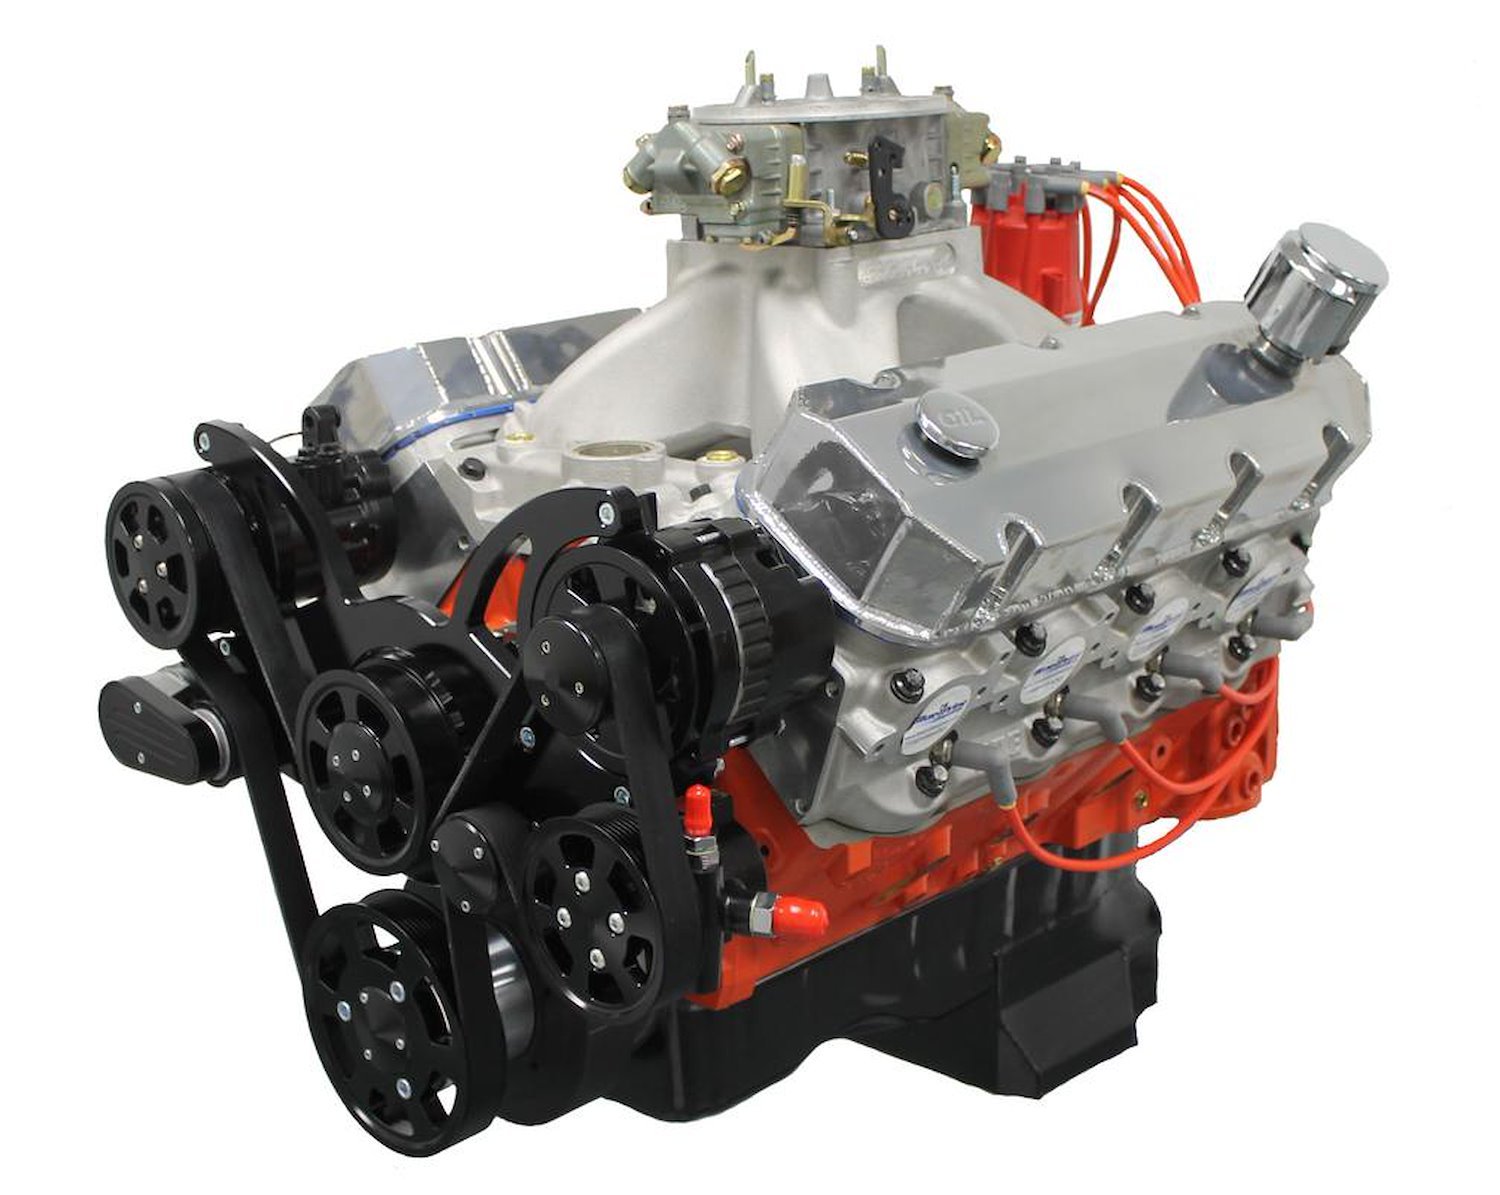 Pro Series Big Block Chevy 632 ci Drop-In Ready Crate Engine [815 HP | 775 ft.-lbs. of TQ]